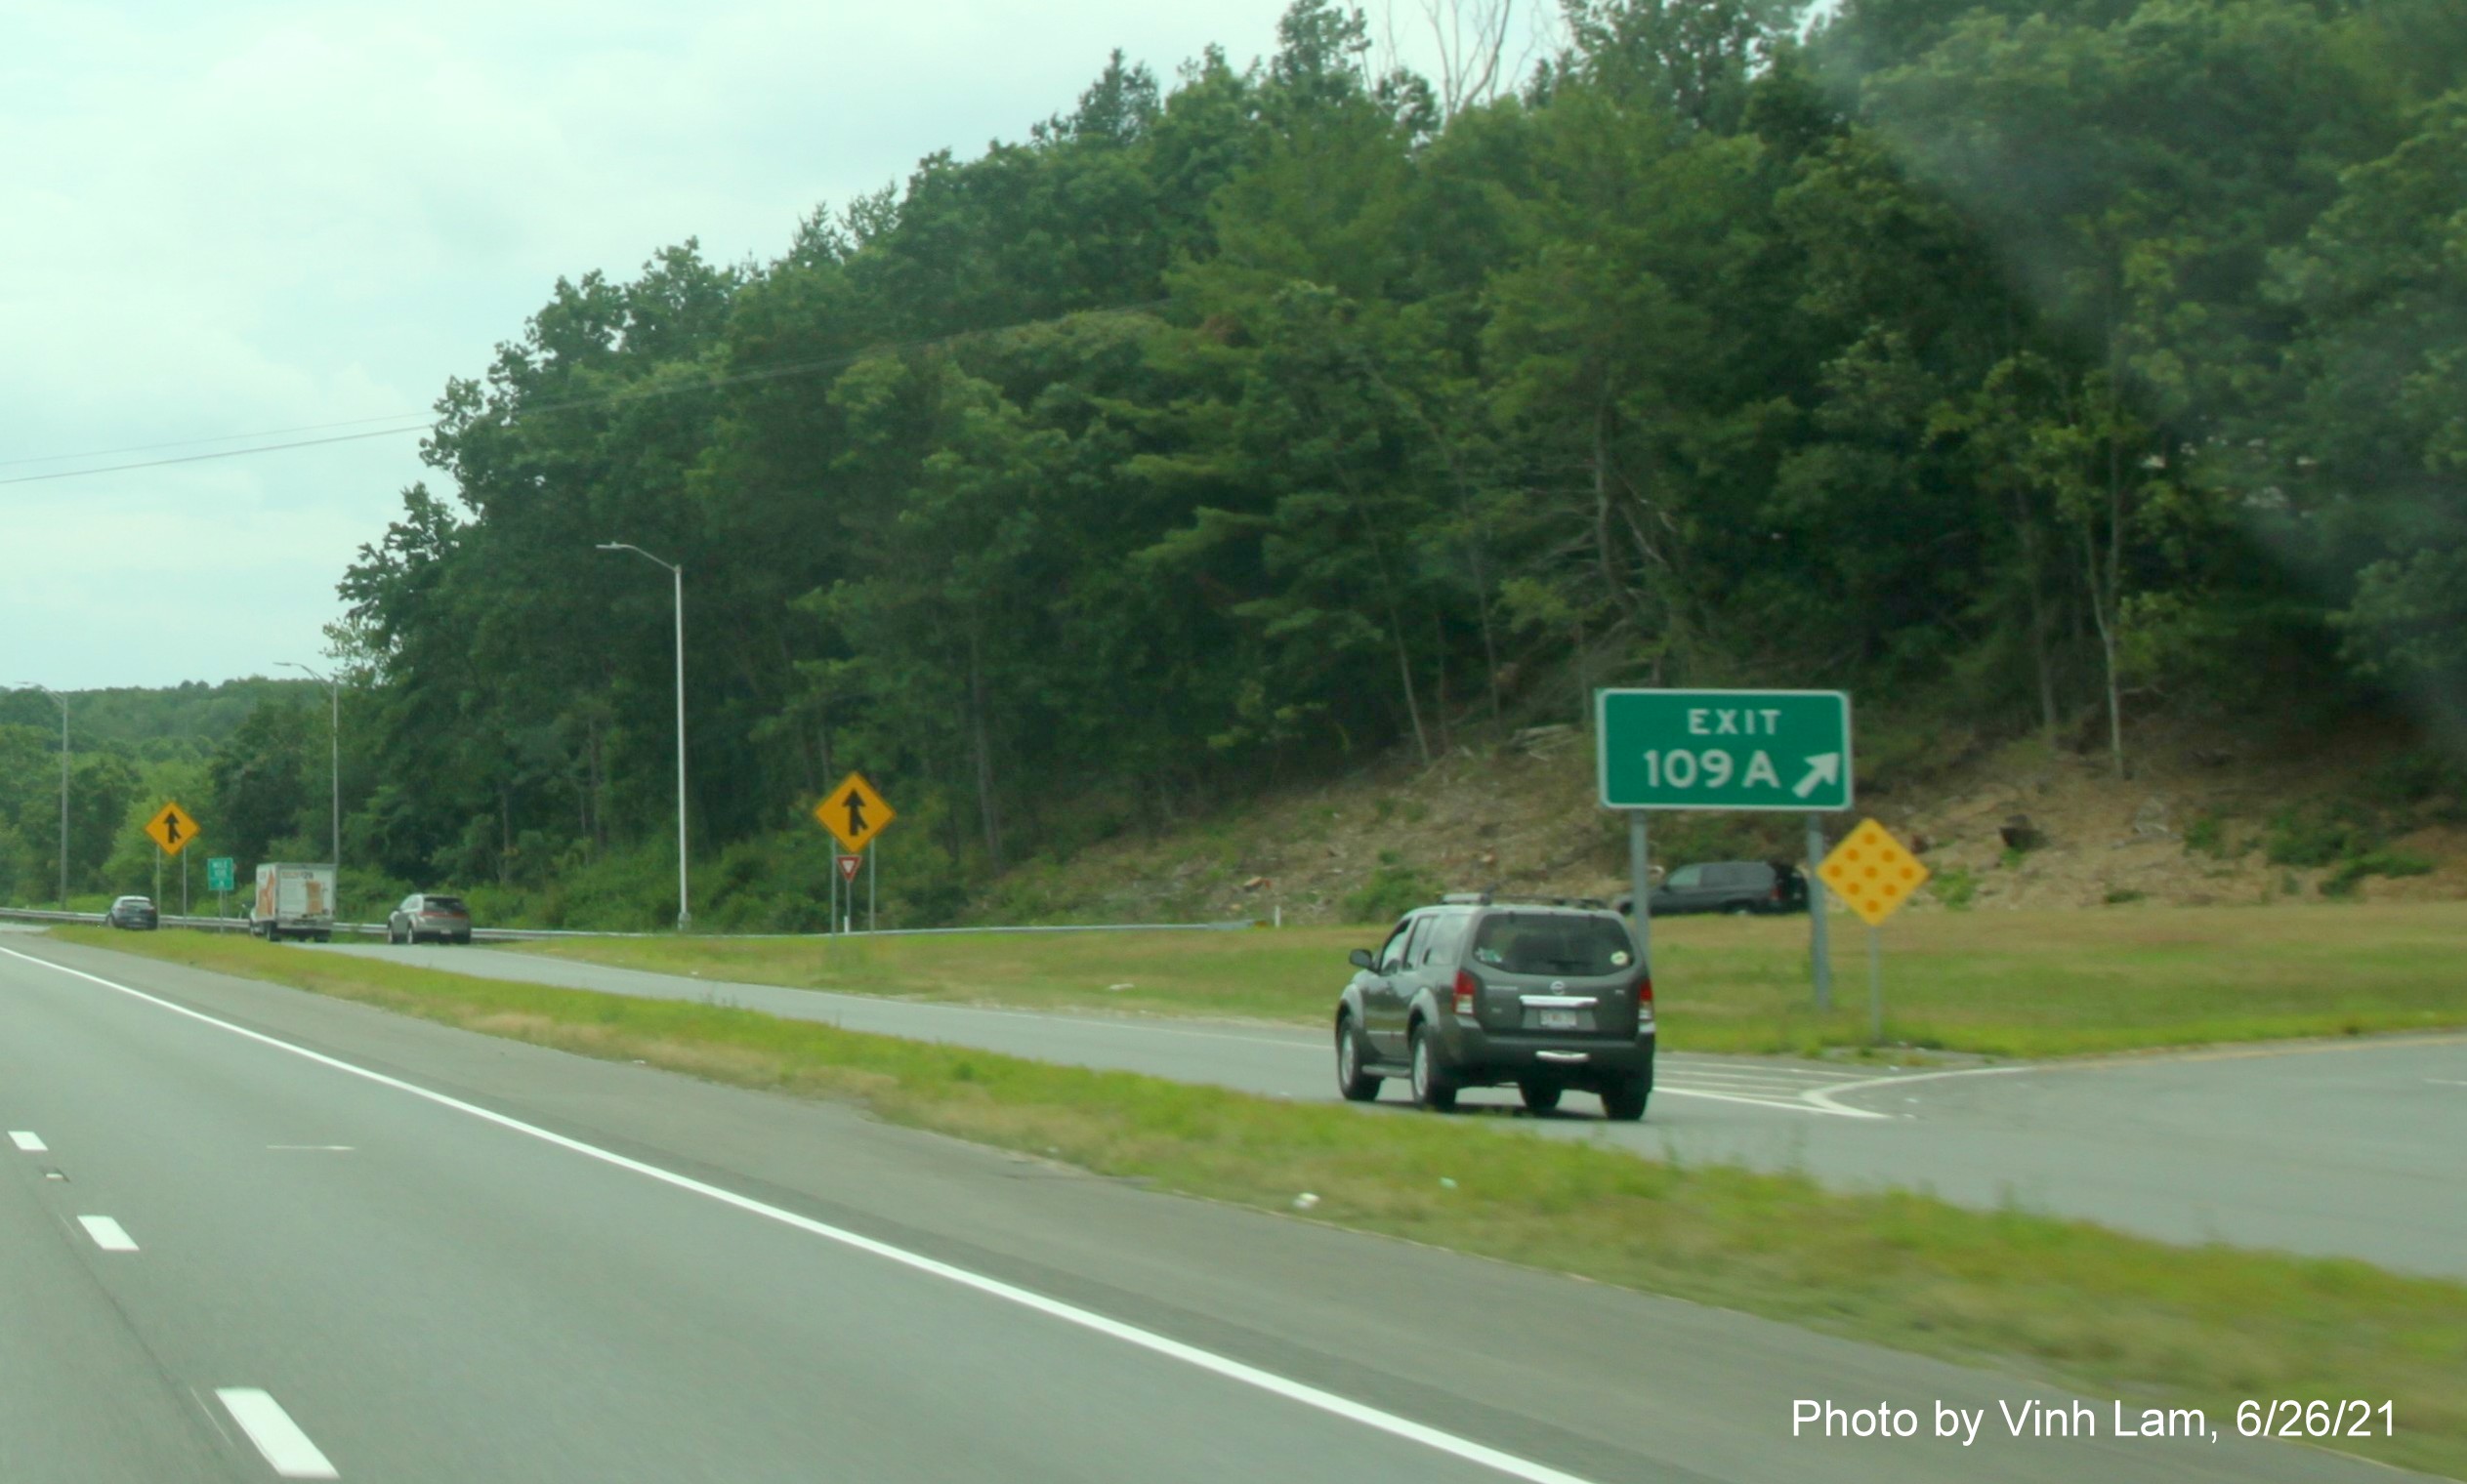 Image of gore sign on C/D lanes for MA 125 South exit with new milepost based exit number and yellow Old Exit 51 sign below on I-495 South in Haverhill, photo by Vinh Lam, June 2021